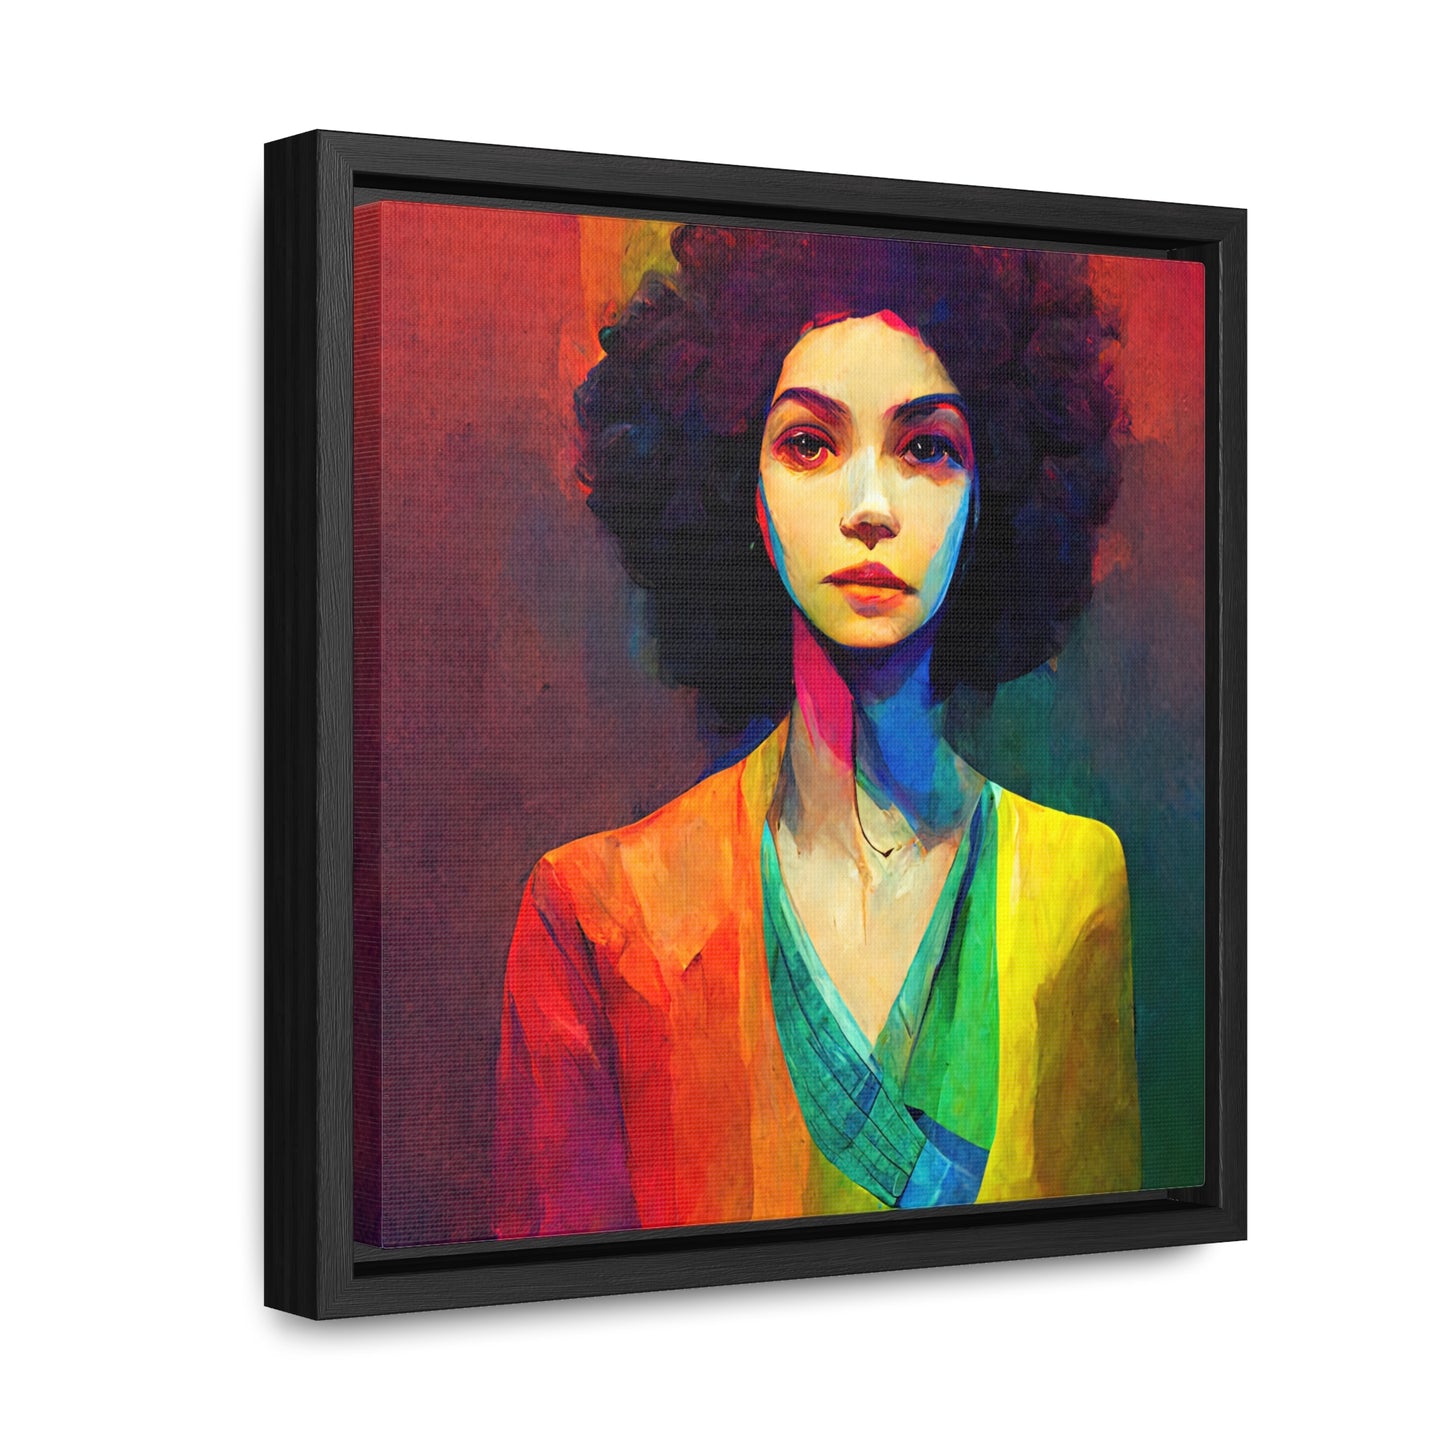 Lady's faces 20, Valentinii, Gallery Canvas Wraps, Square Frame